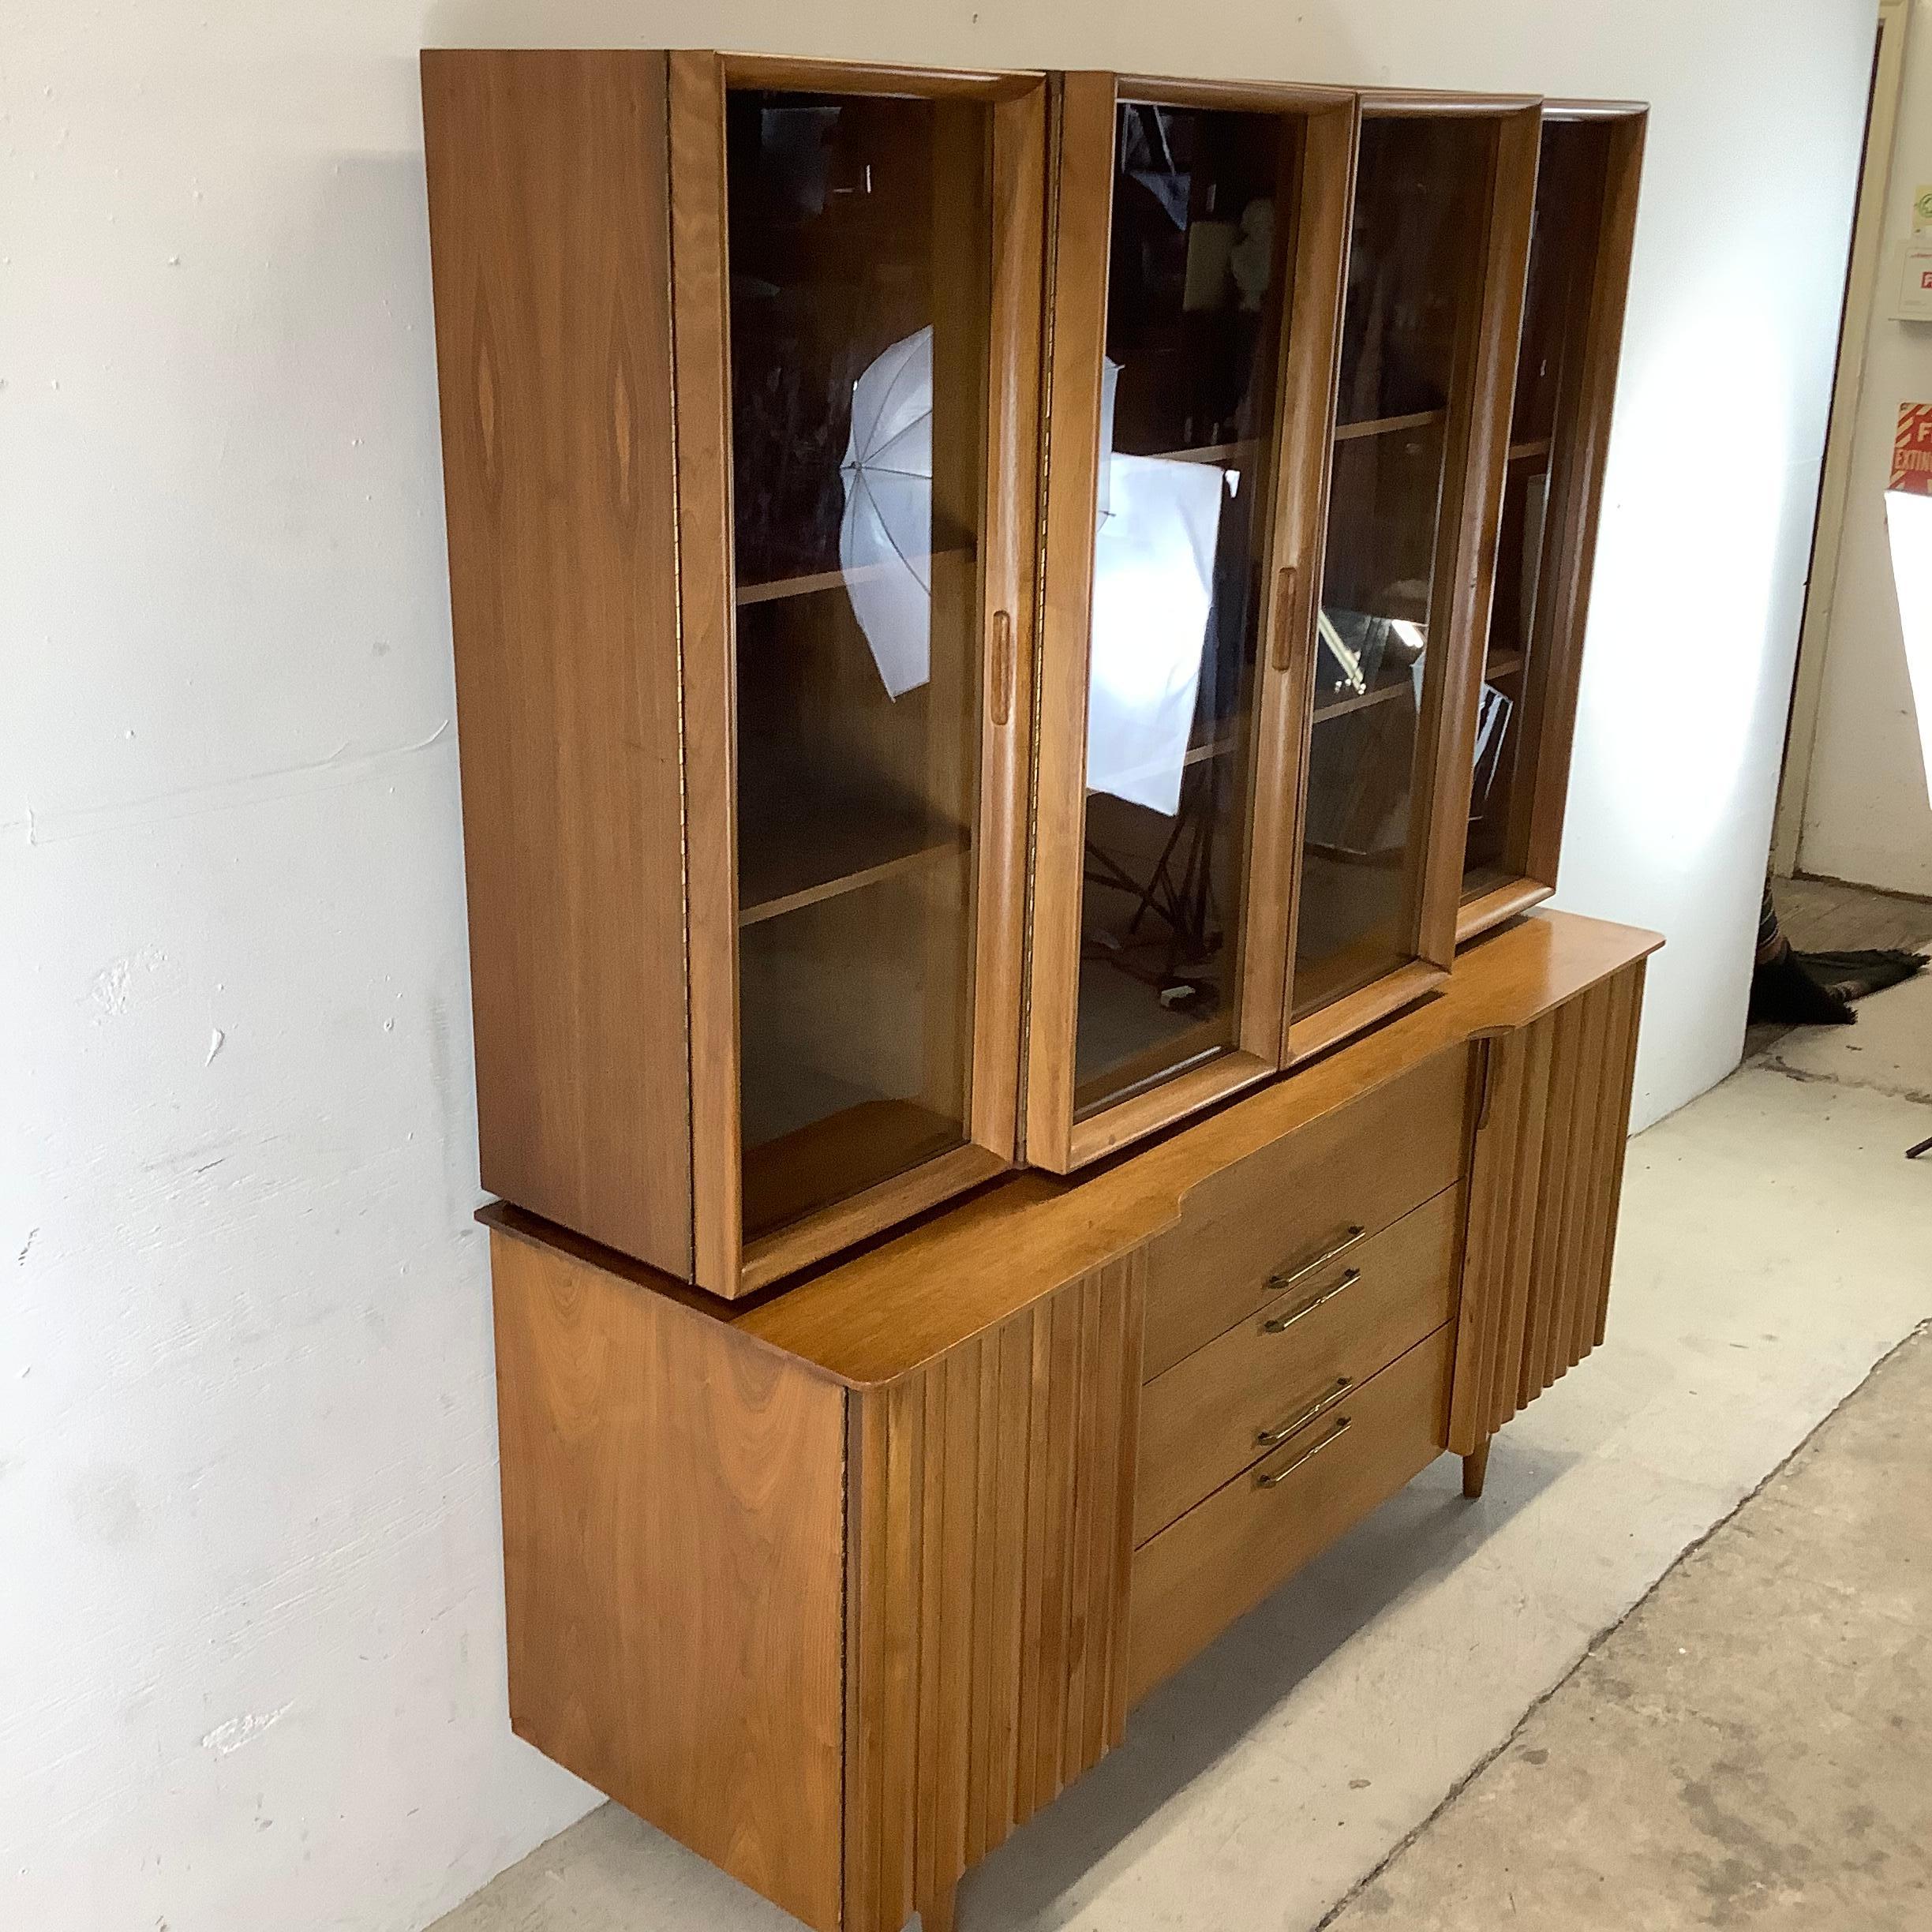 Beautiful Mid-Century Modern sideboard with breakfront display top makes an impressive storage solution for dining room, living room, or any setting. Natural walnut finish, quality vintage construction, Danish Modern design, and spacious interior